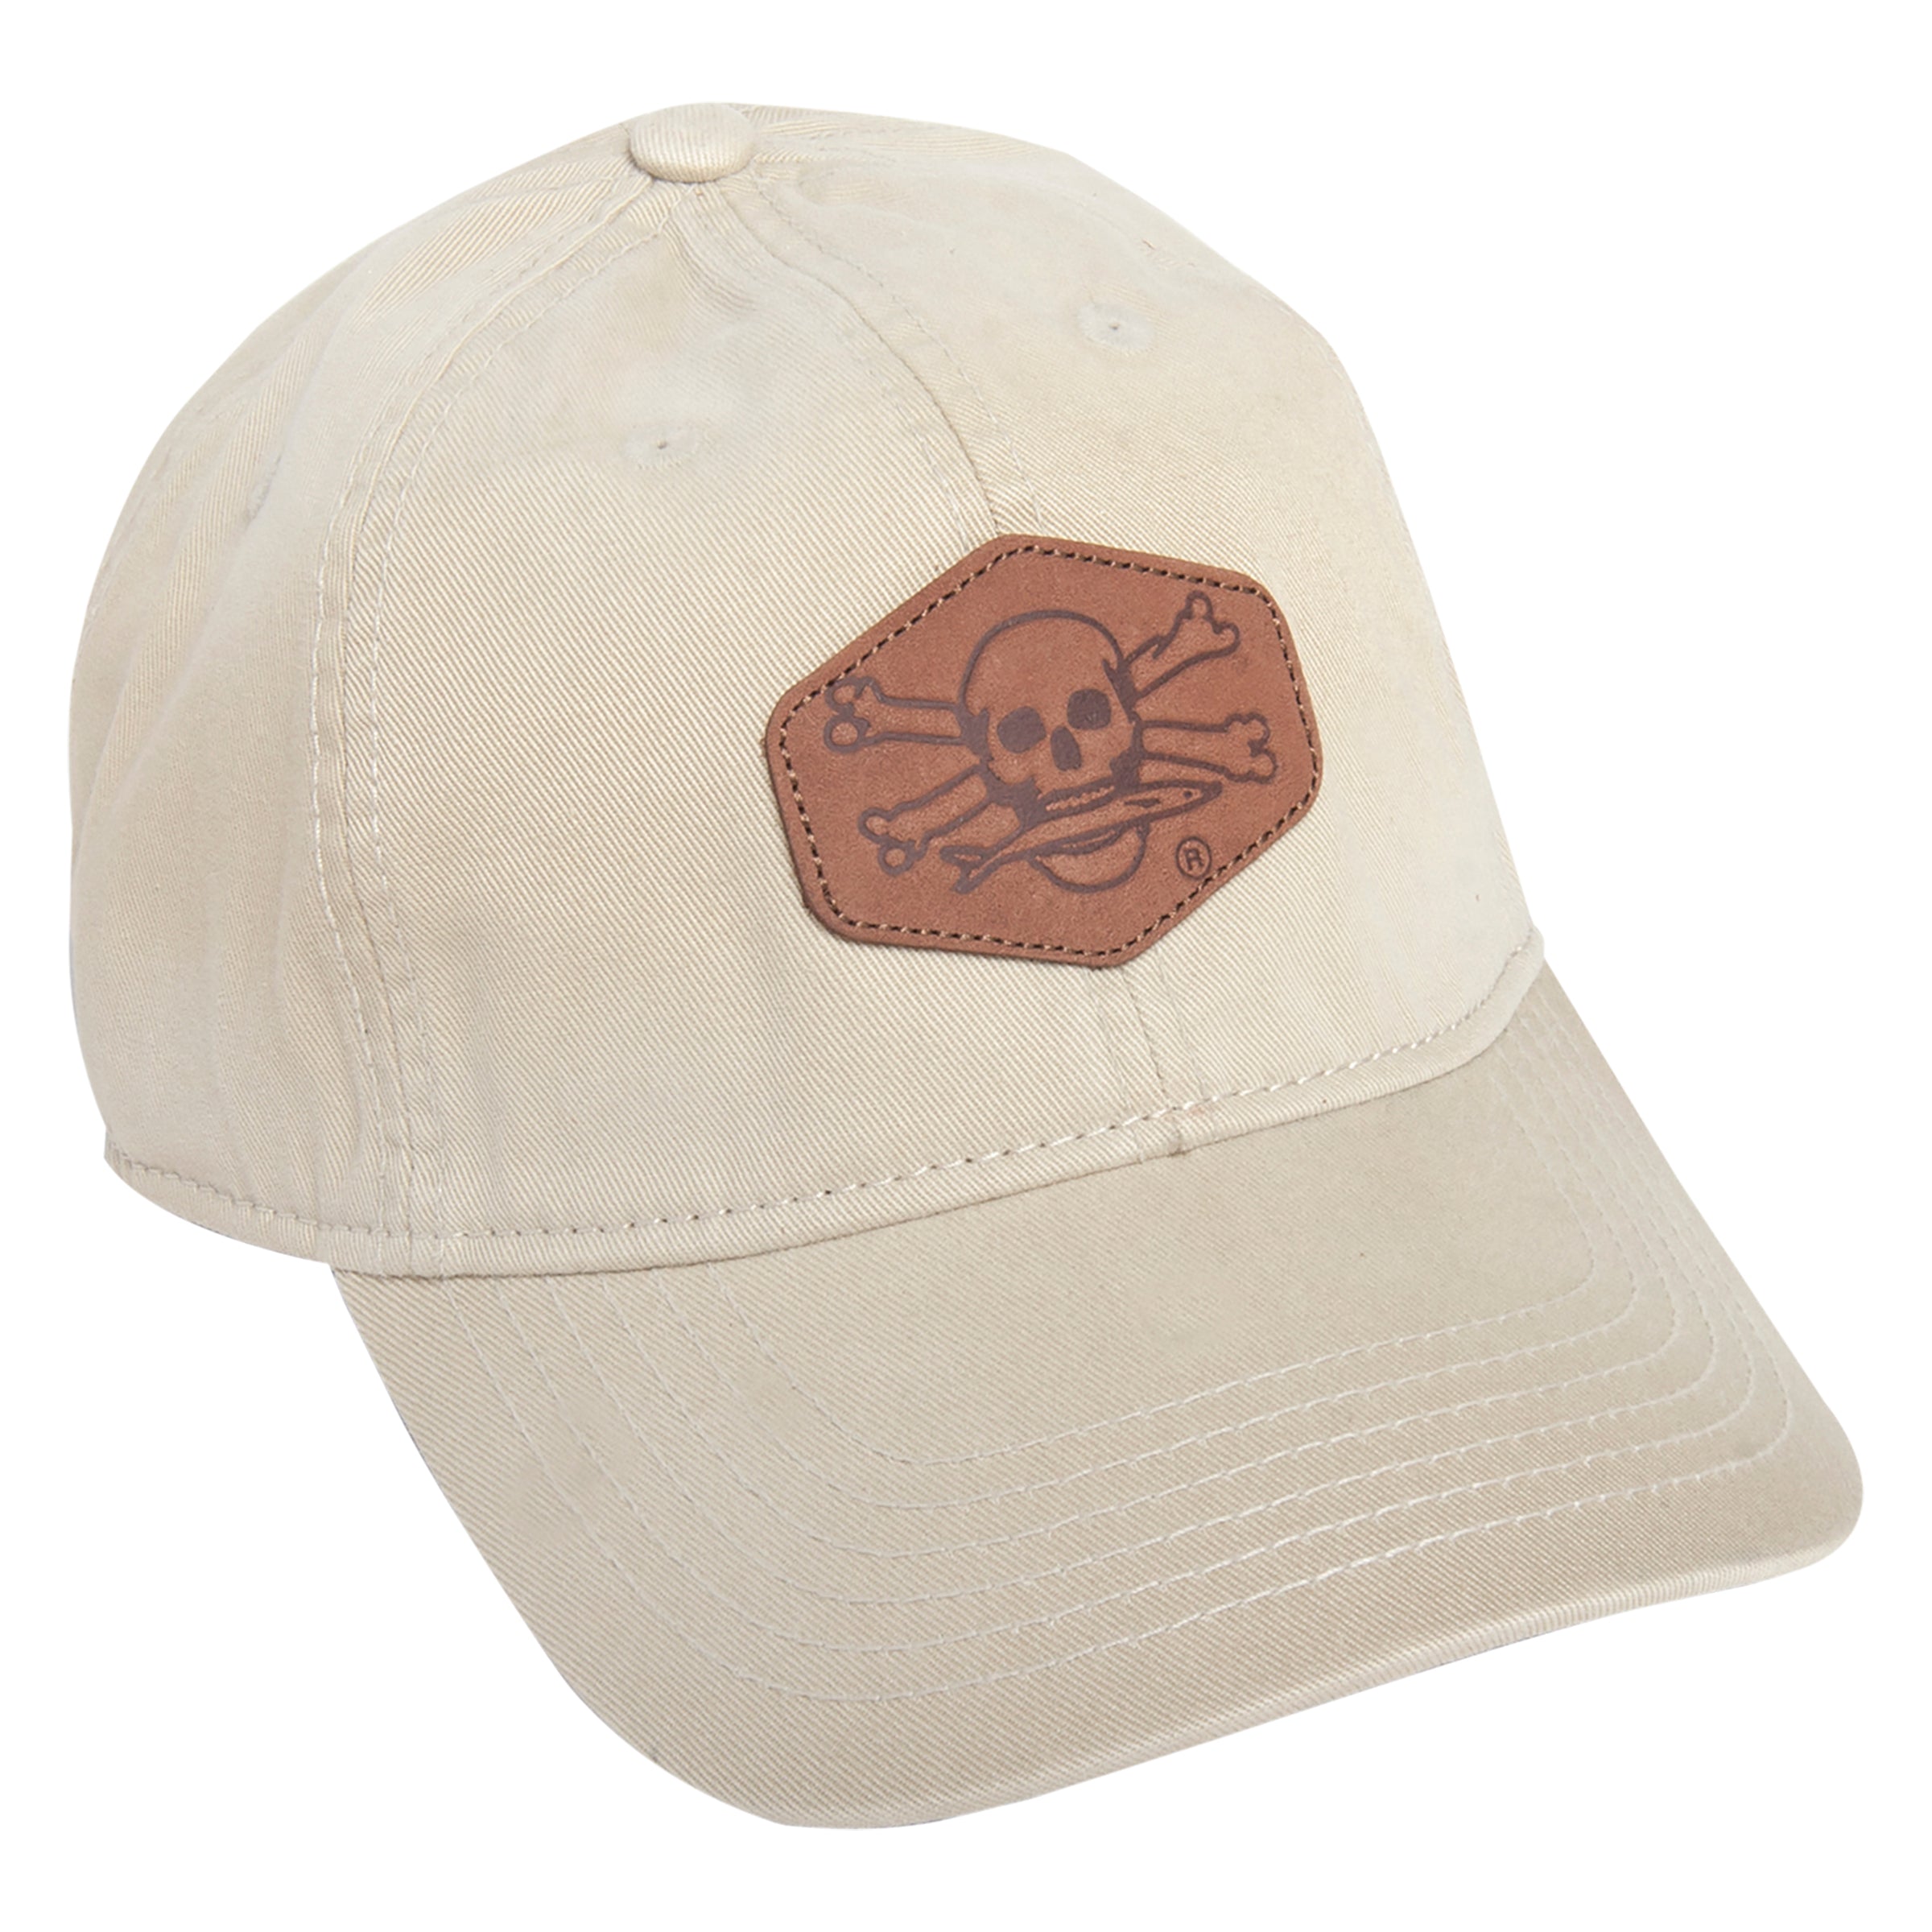 Khaki Calcutta hat with leather patch